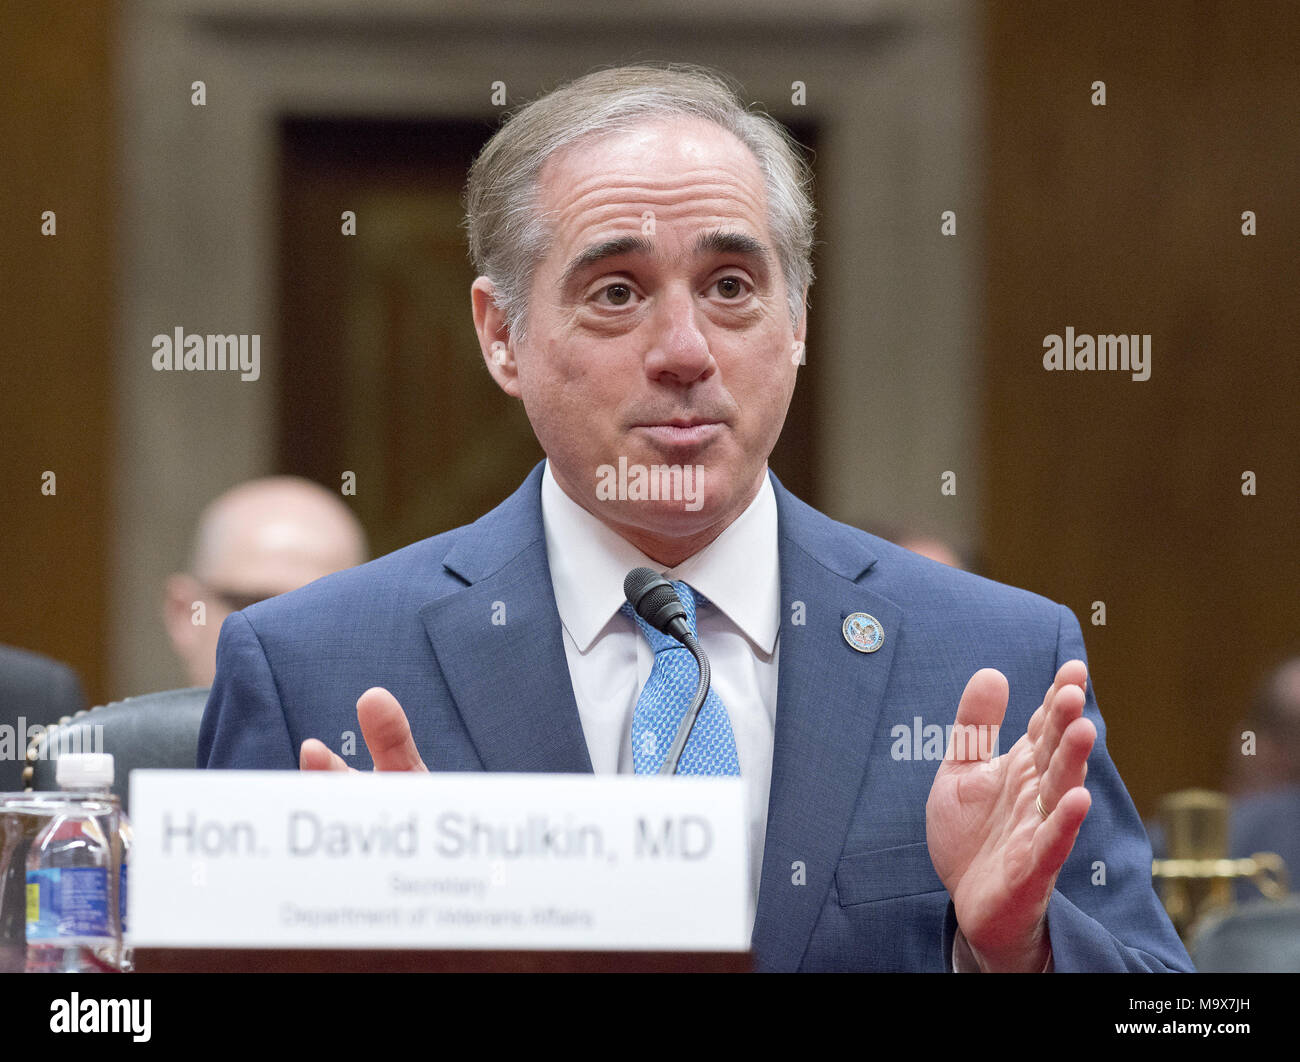 March 28, 2018 - (File Photo) - Veterans Affairs secretary David Shulkin is ousted in the wake of an ethics scandal. PICTURED: May 11, 2017 - Washington, District of Columbia, United States of America - United States Secretary of Veterans Affairs David J. Shulkin, M.D., testifies before the US Senate Committee on Appropriations Subcommittee on Military Construction, Veterans Affairs, and Related Agencies on ''Reducing Burden & Increasing Access to Healthcare: Improving VA Community Care'' on Capitol Hil. Credit: Ron Sachs/CNP/ZUMA Wire/Alamy Live News Stock Photo